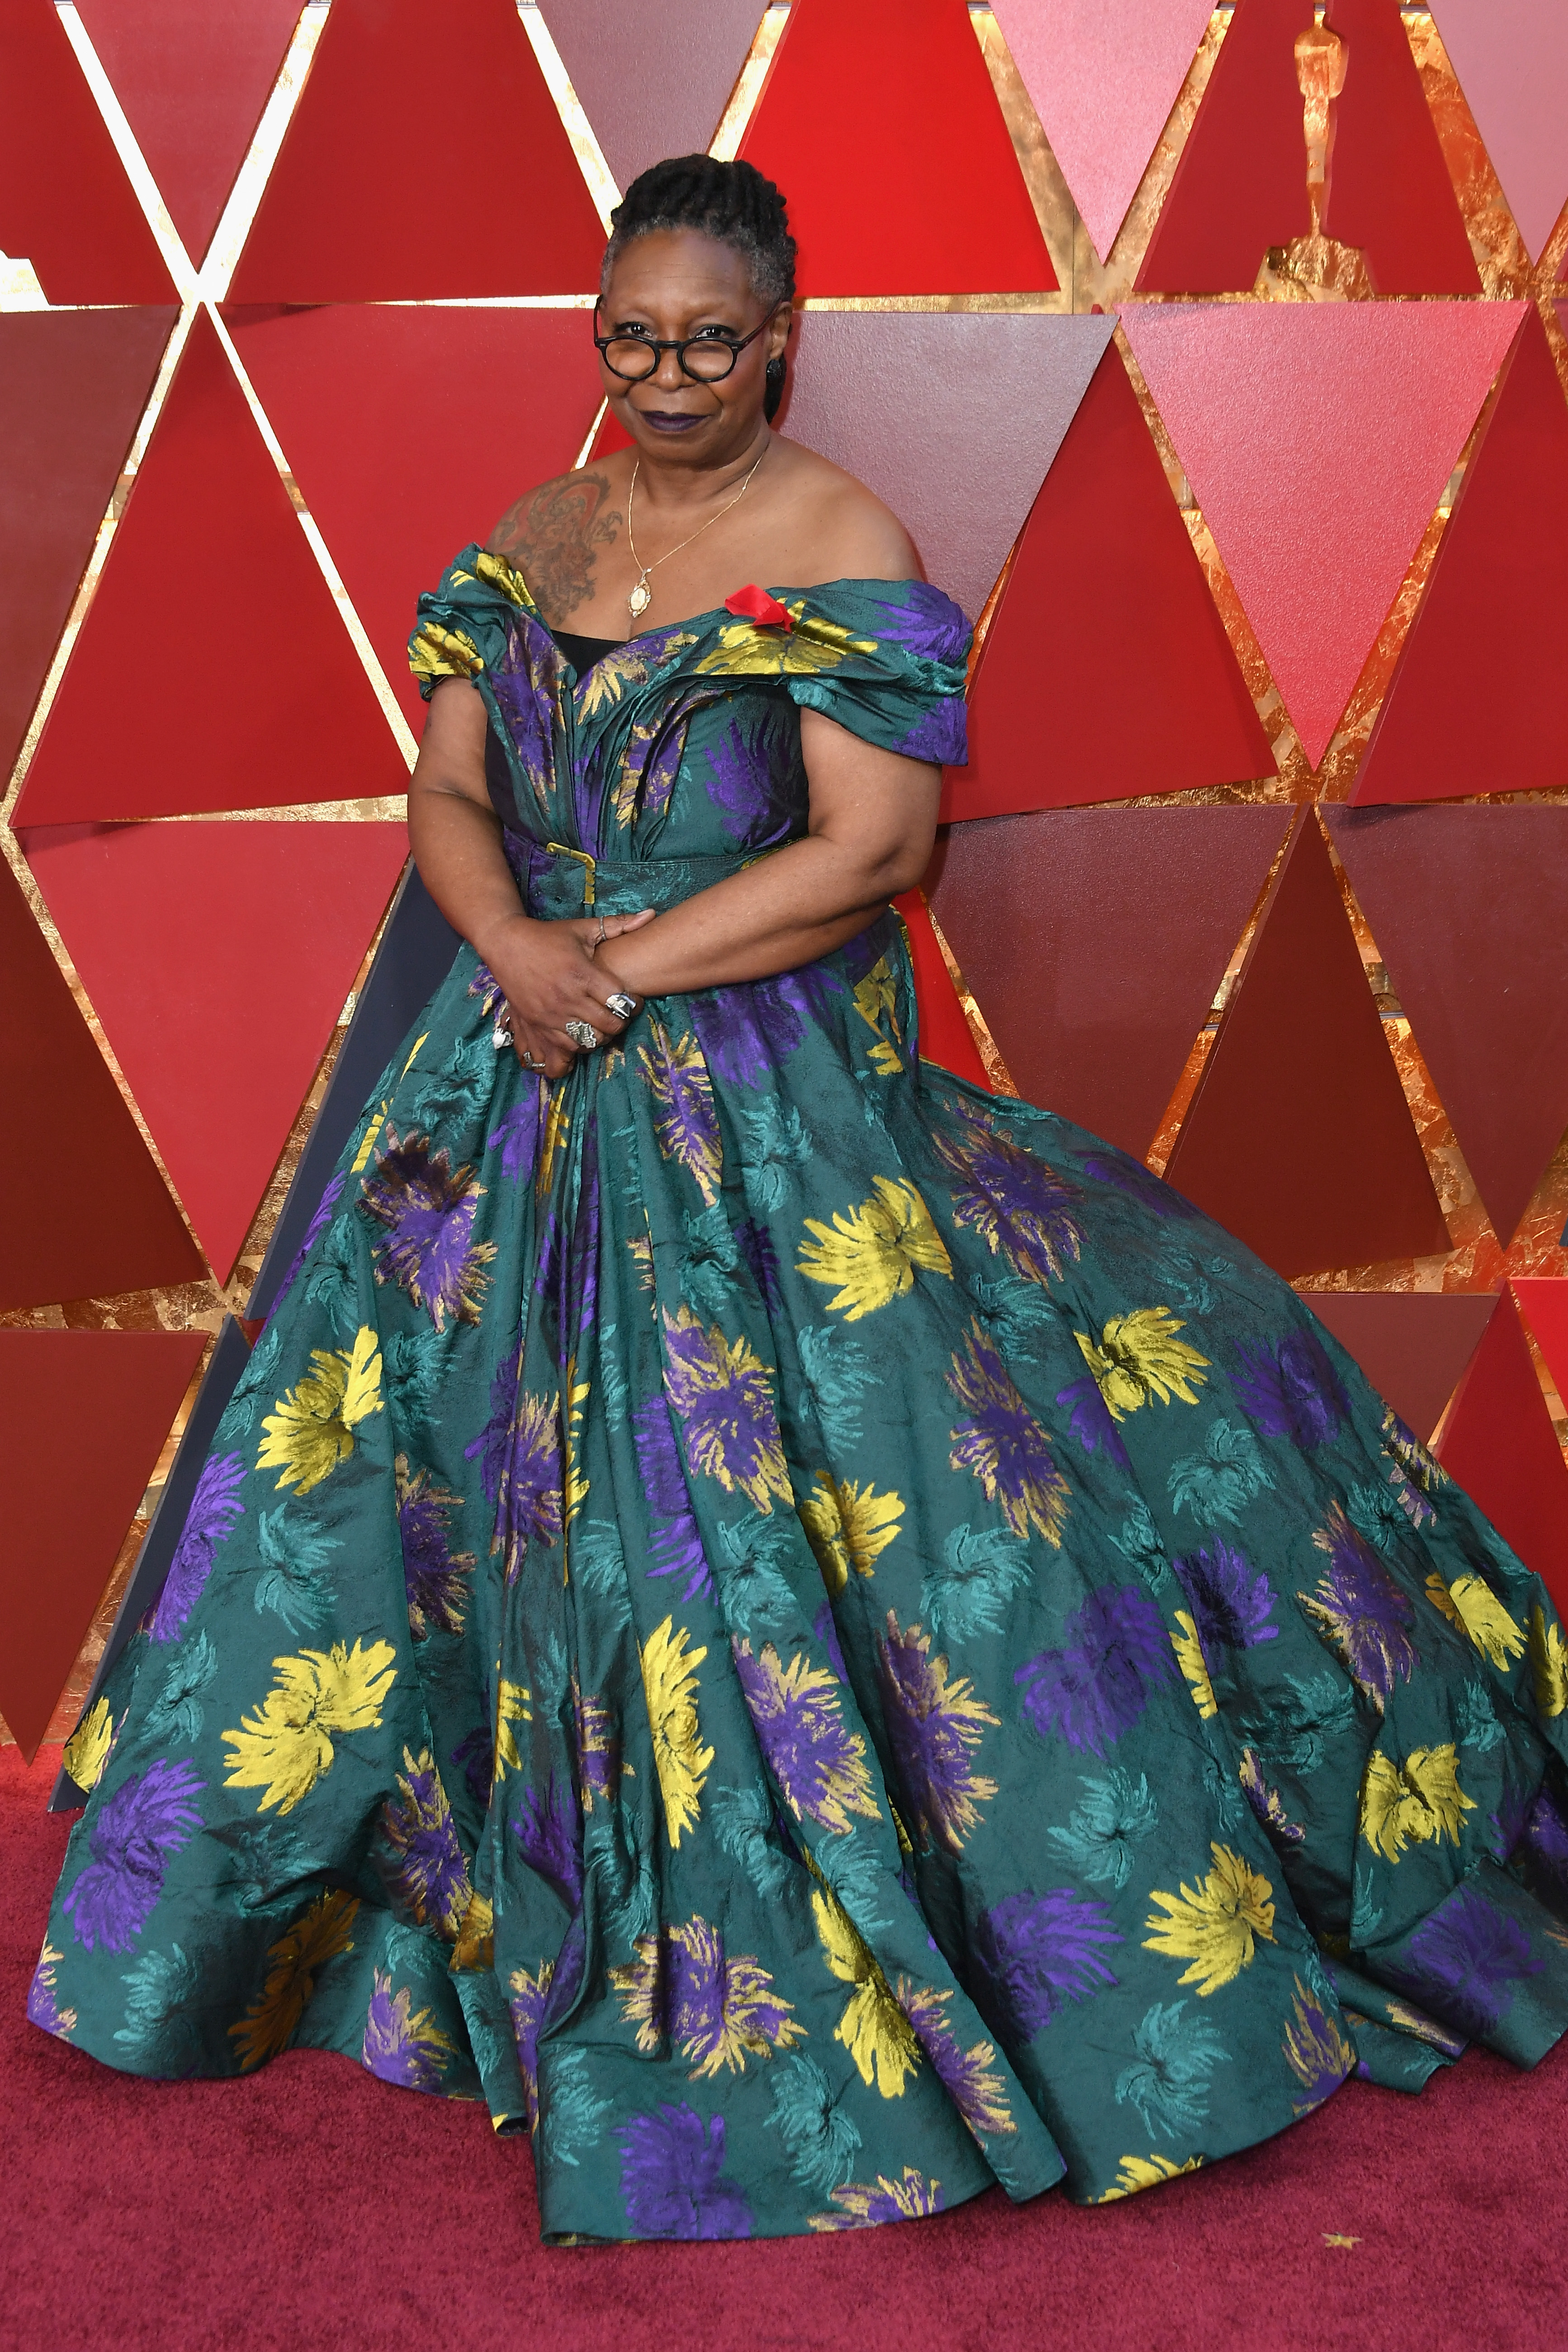 Whoopi Goldberg attends the 90th Annual Academy Awards in Hollywood, California on March 4, 2018 | Source: Getty Images